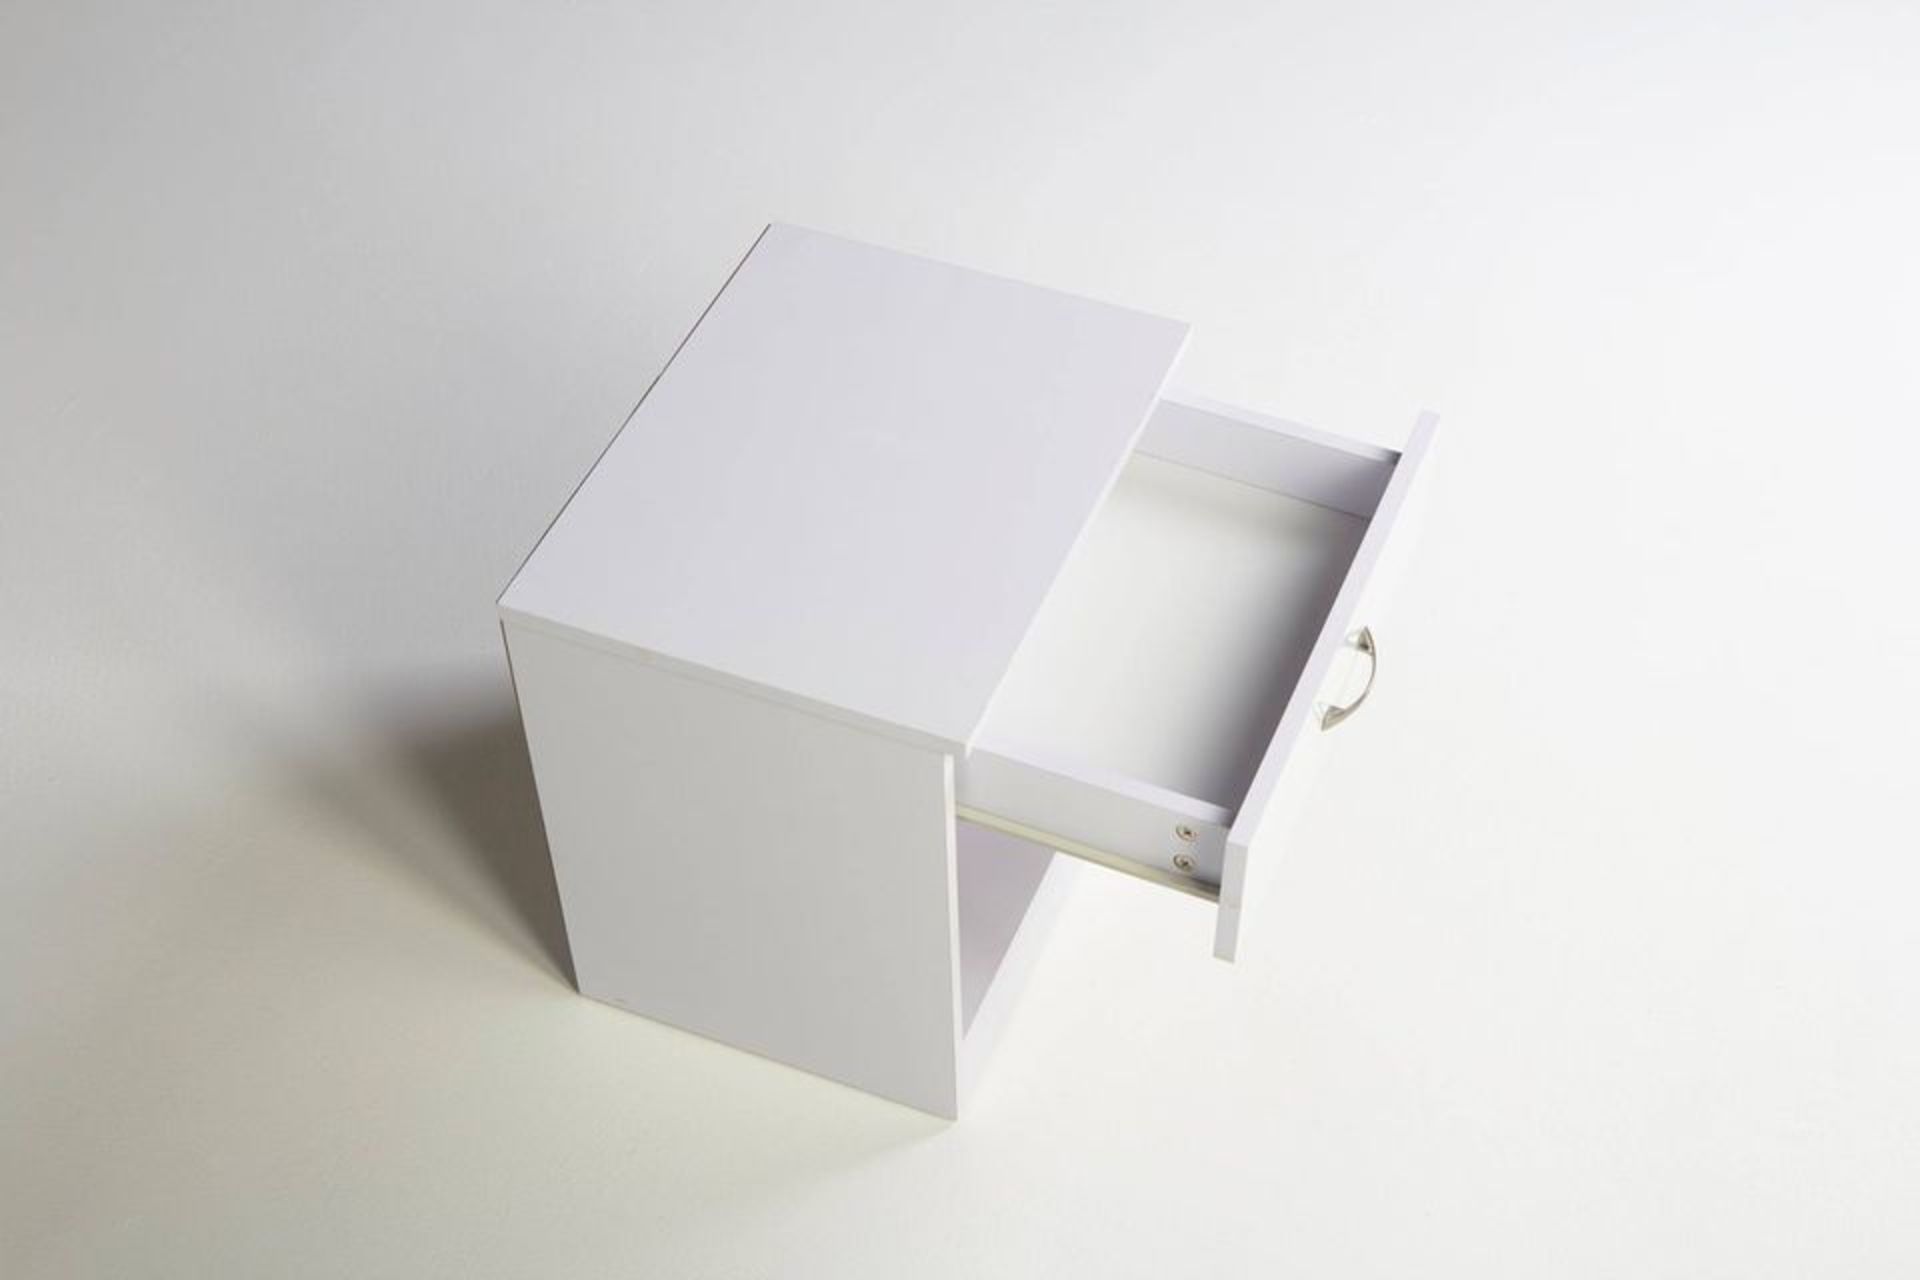 20 X WHITE SINGLE DRAWER BEDSIDES WITH HIGH GLOSS DRAWER FRONTS - Image 4 of 4